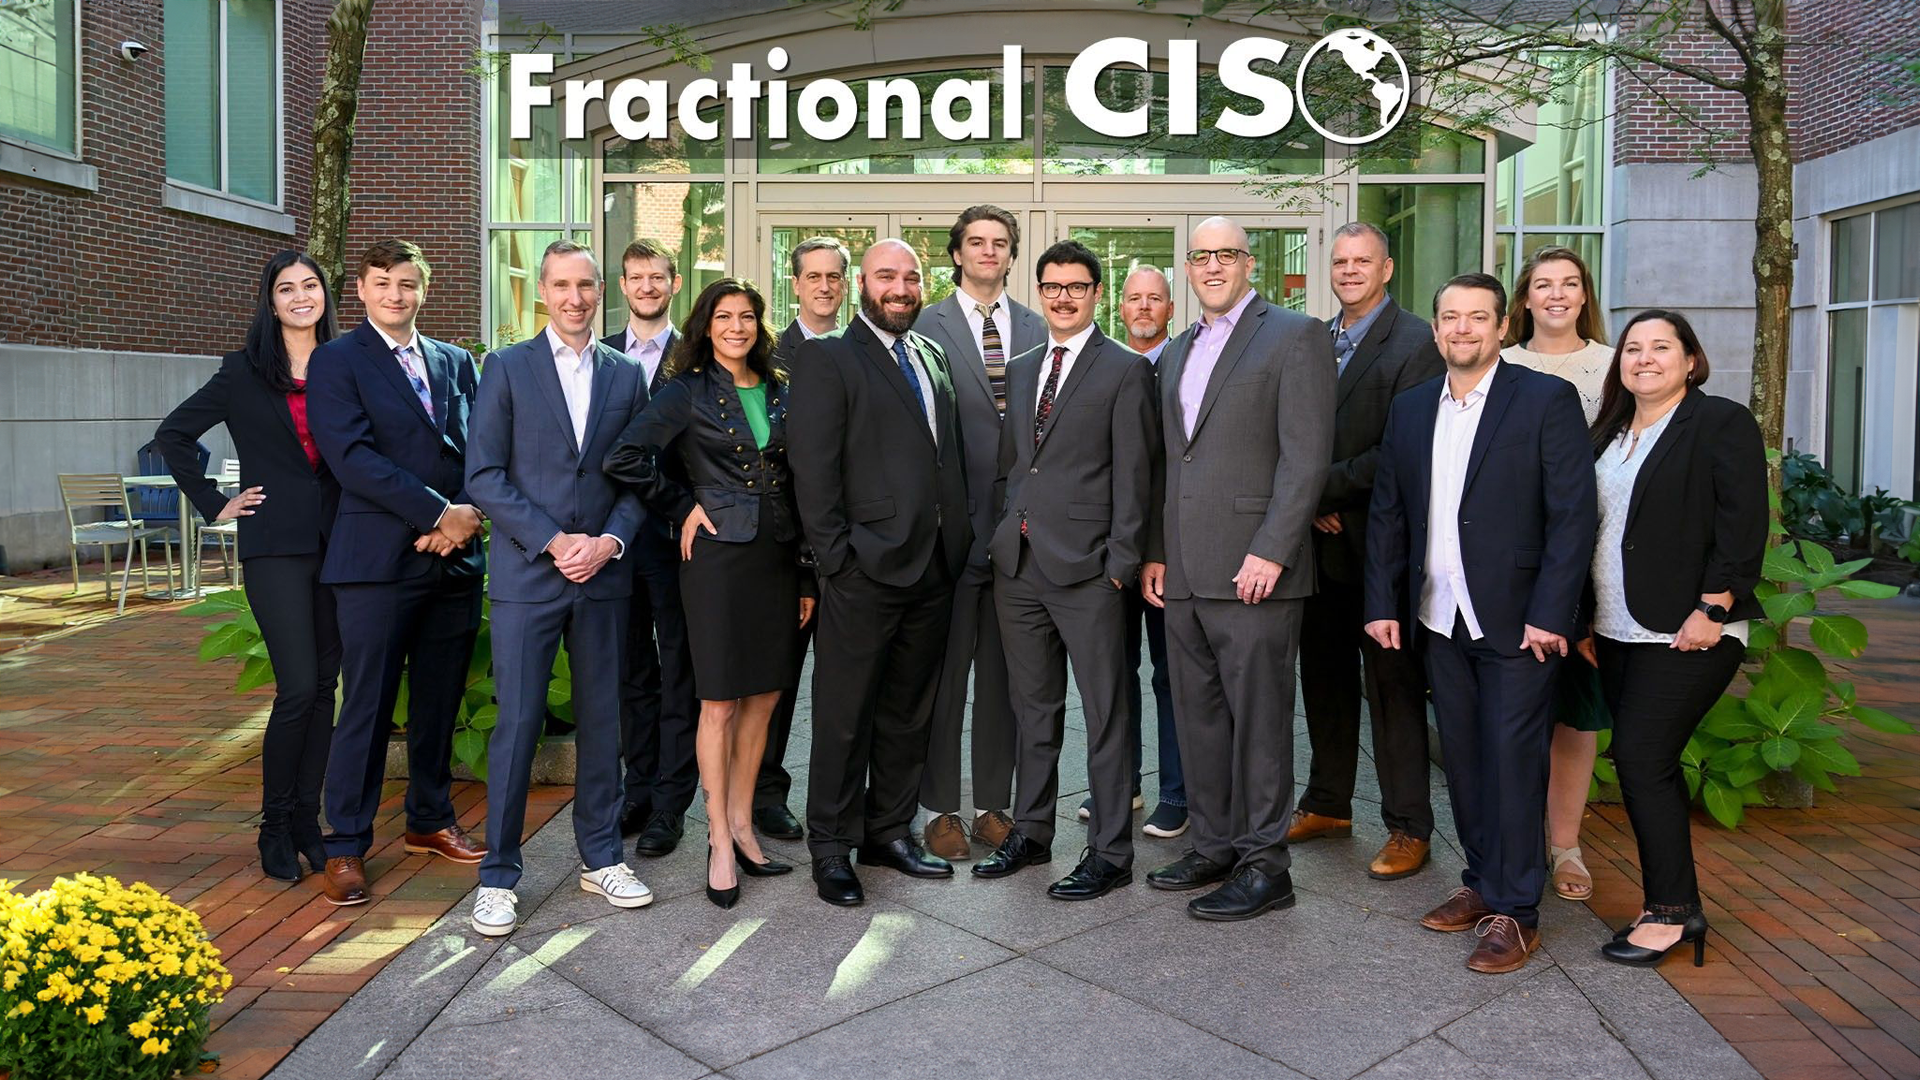 The Fractional CISO team of about 15 people, all standing posing for a picture. They are our virtual CISO team